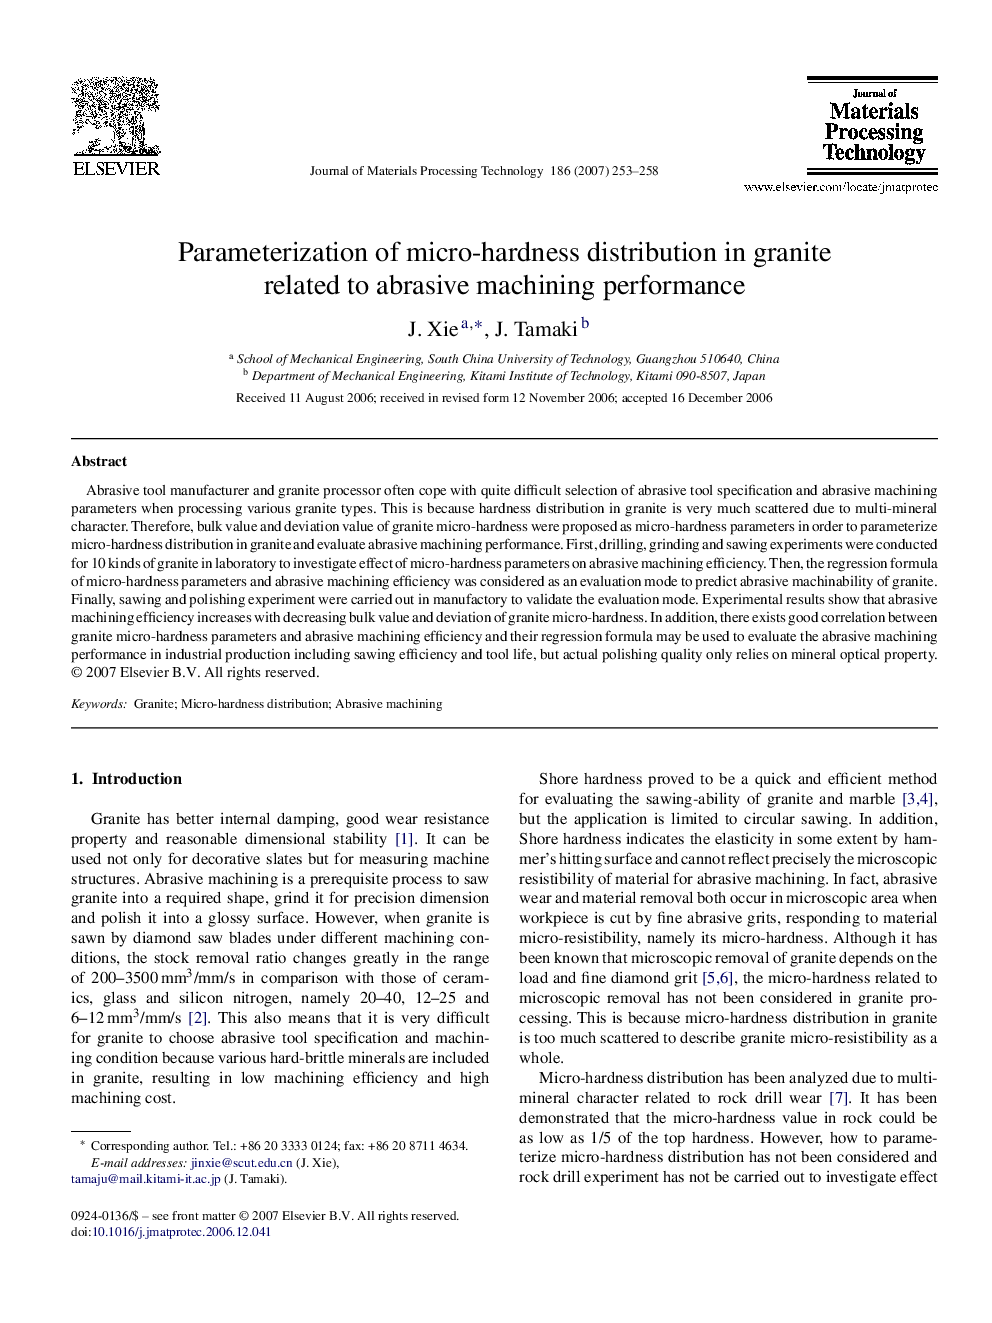 Parameterization of micro-hardness distribution in granite related to abrasive machining performance